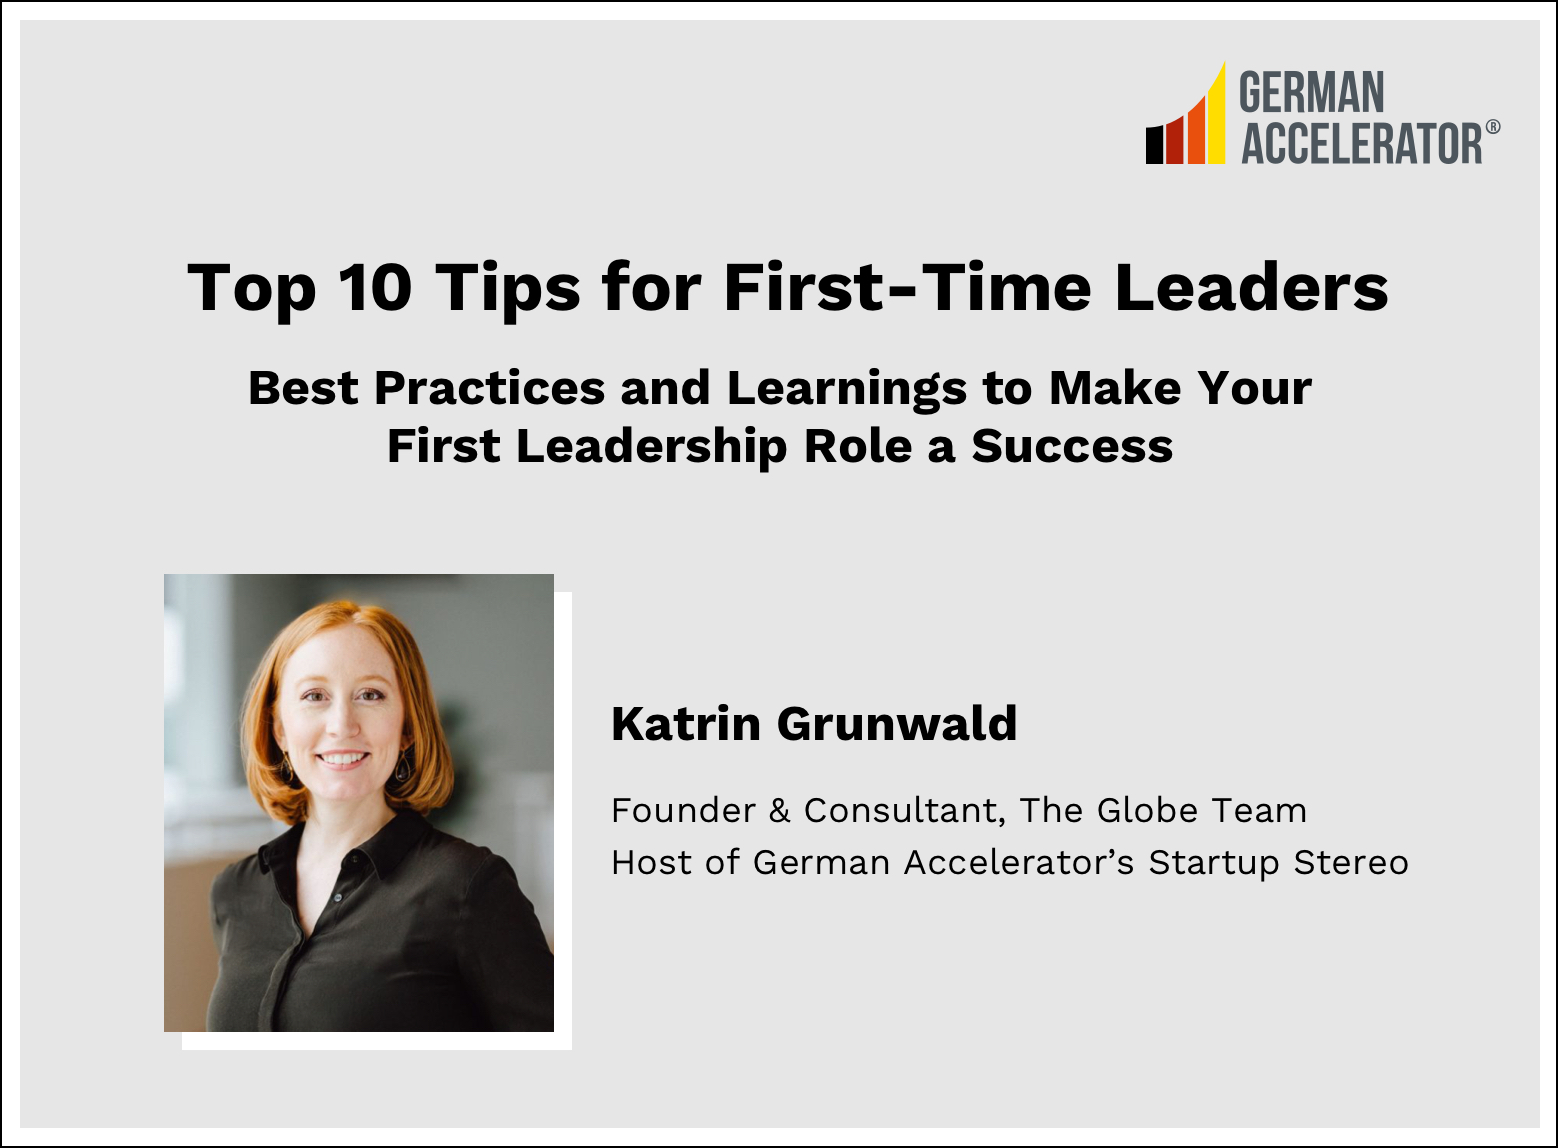 Top 10 Tips for First-Time Leaders